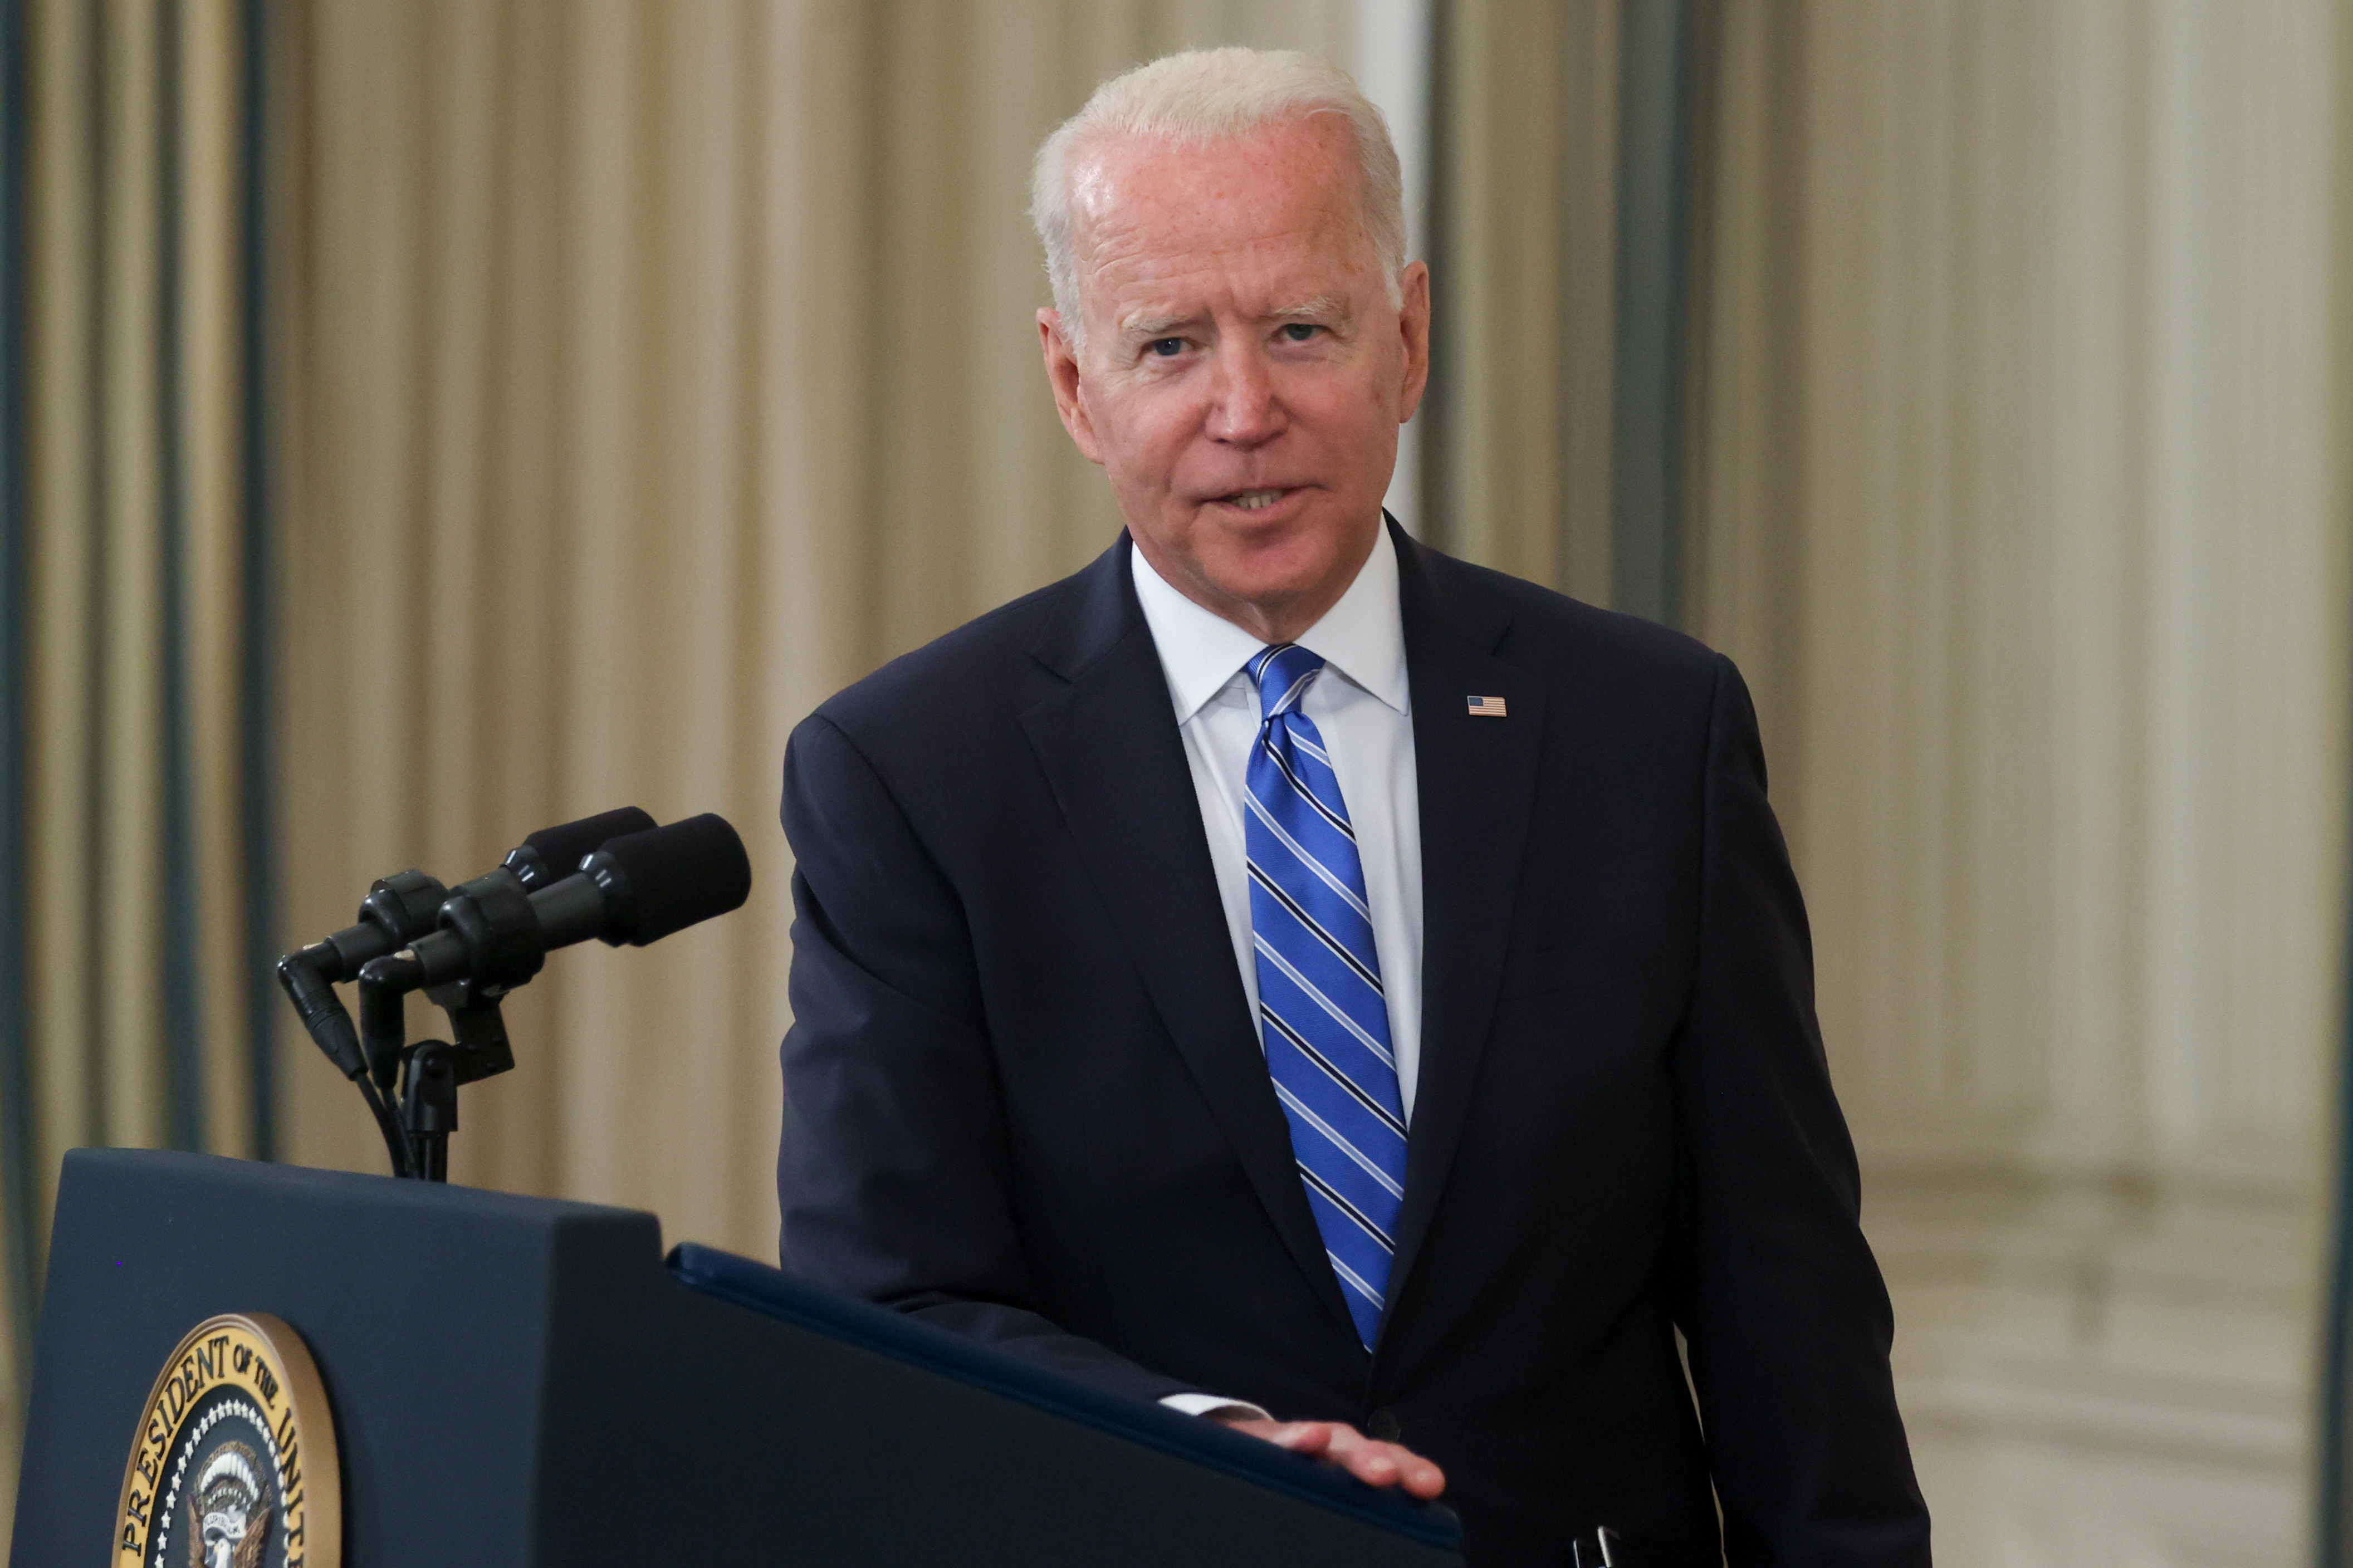 U.S. President Joe Biden takes questions from reporters after delivering remarks on the economy at the White House in Washington